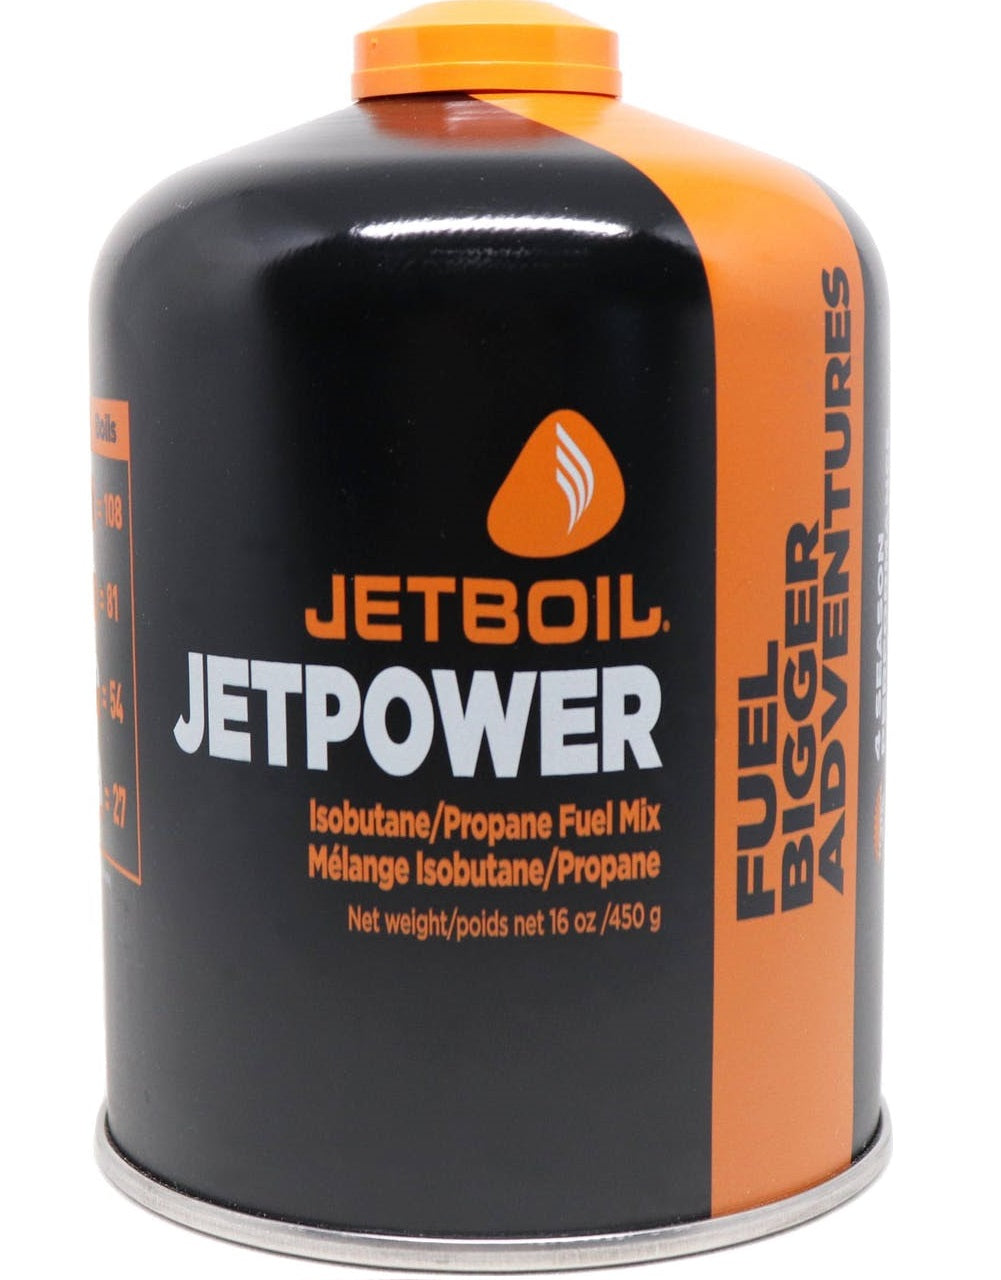 Jetboil Jetpower Fuel Gas Canister 450g